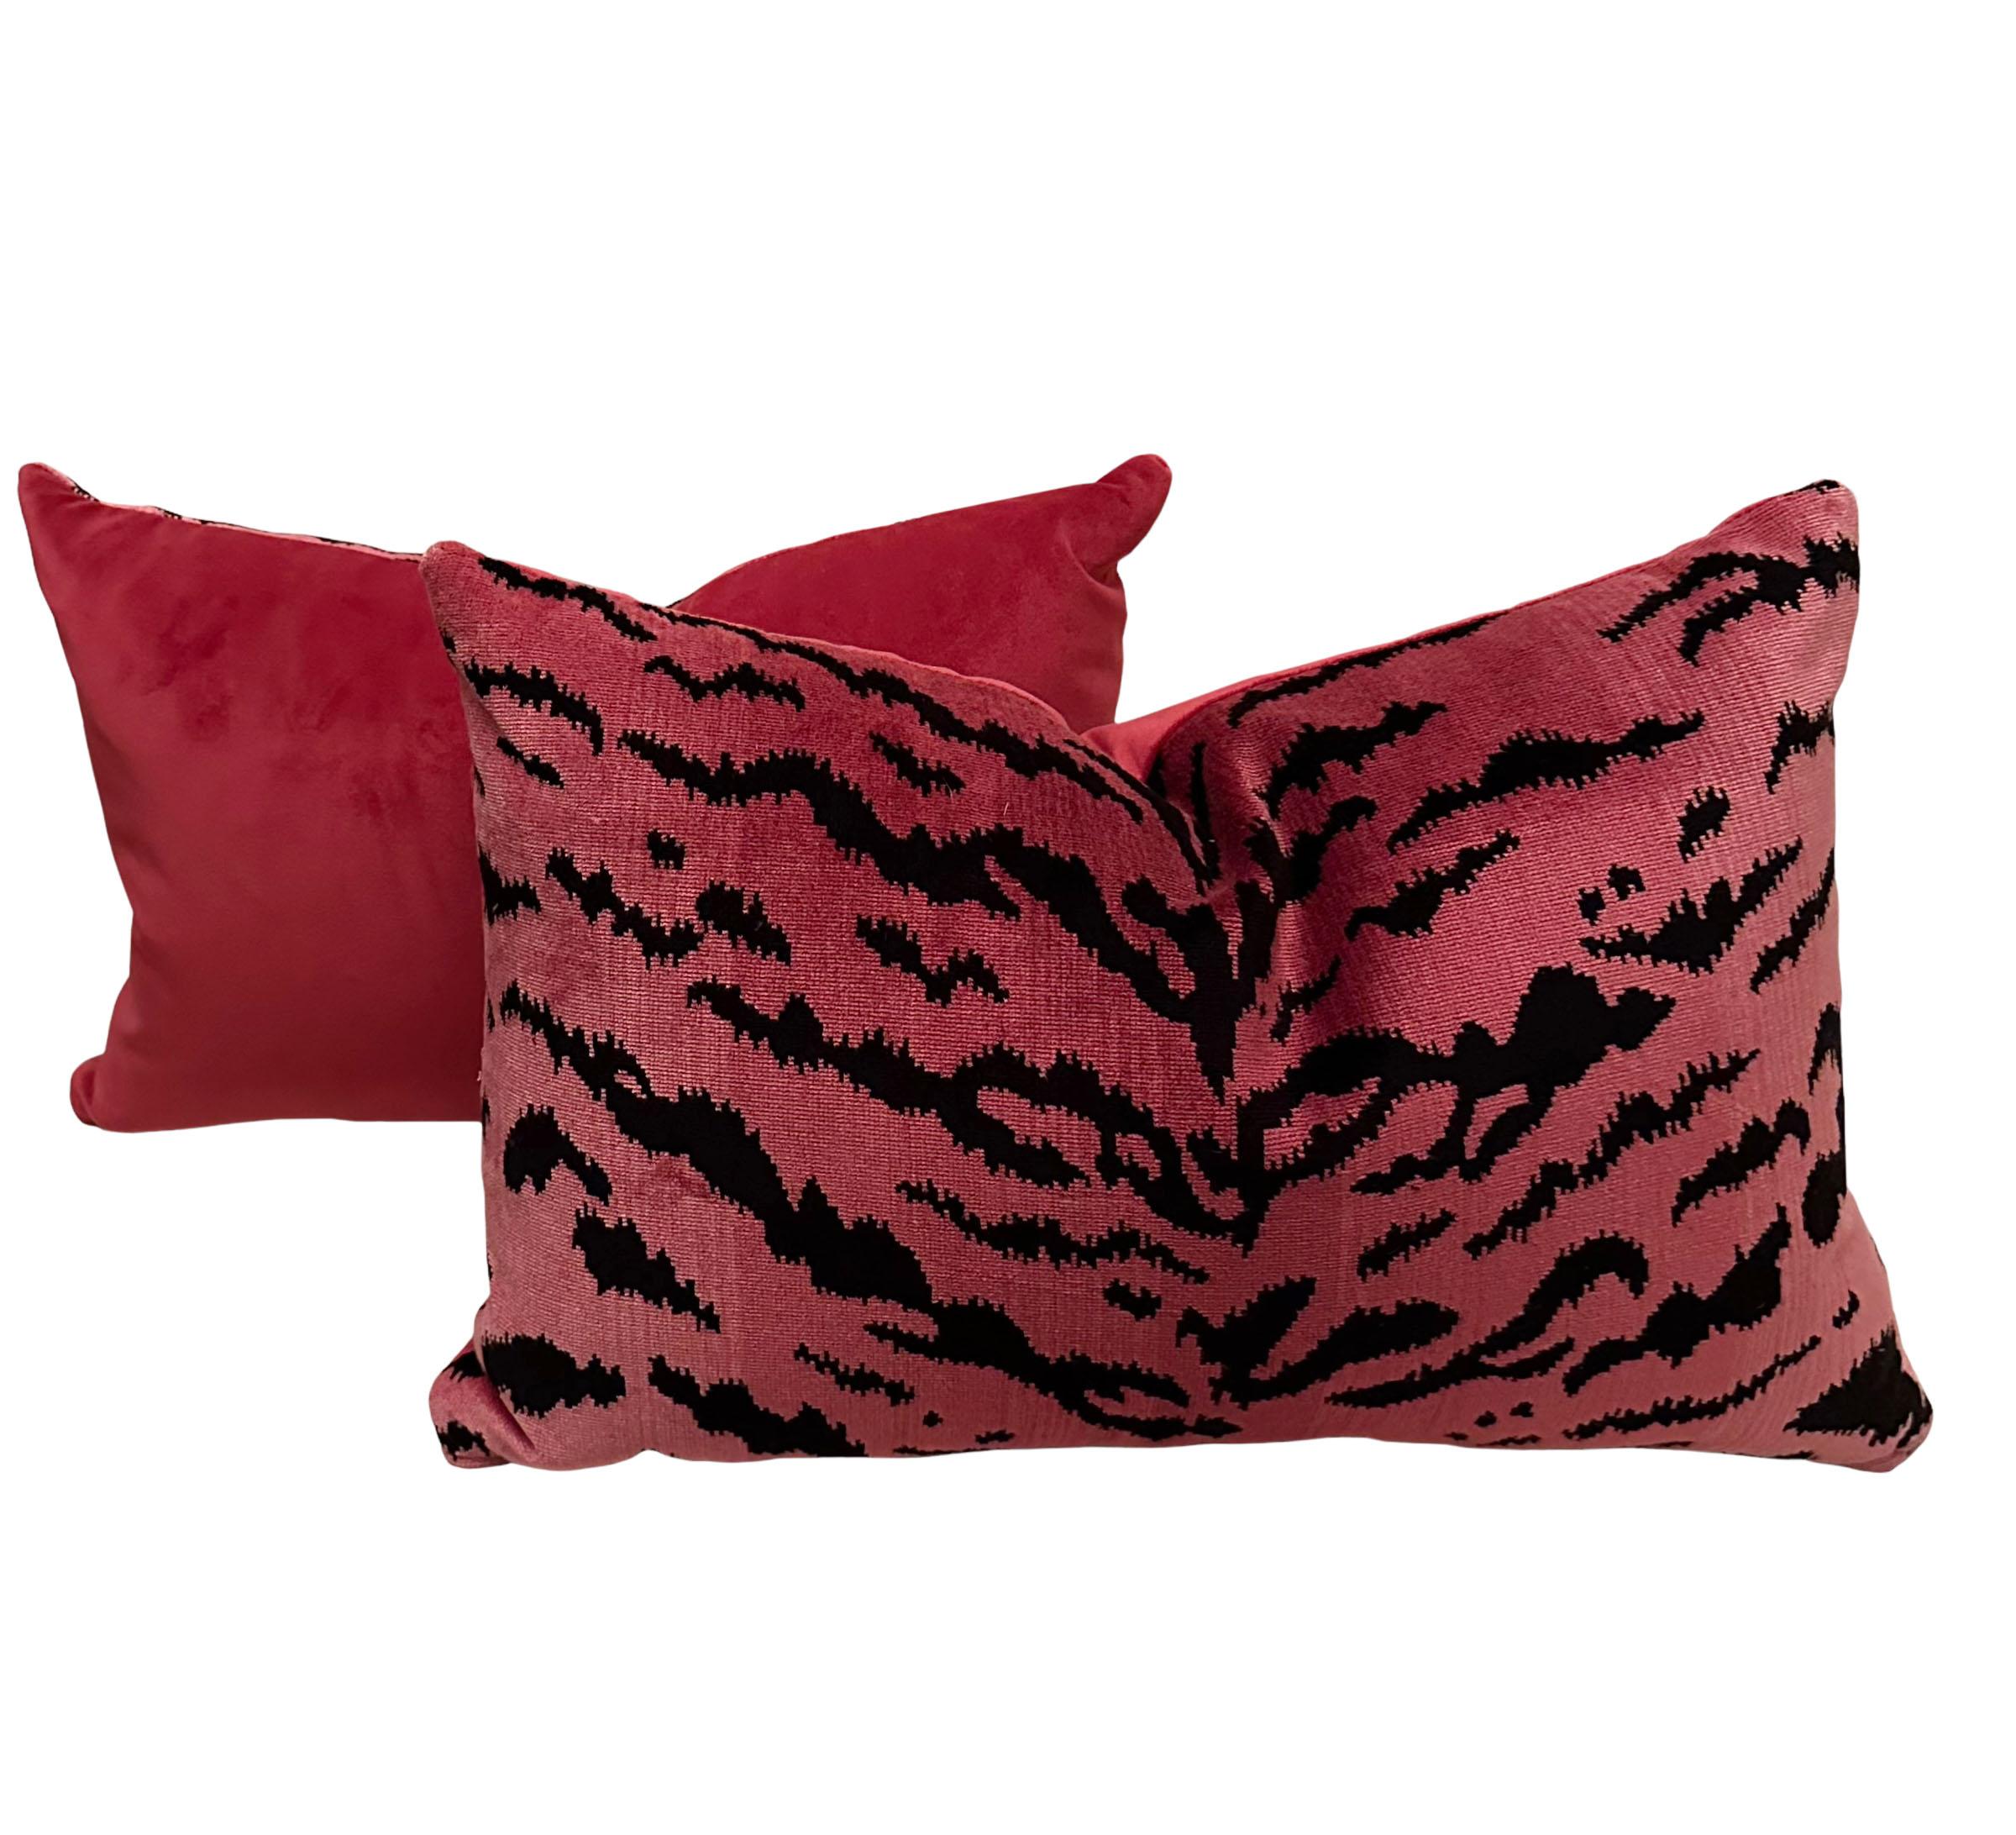 Late 20th Century Scalamandre Pillows in Fuchsia, a Pair For Sale